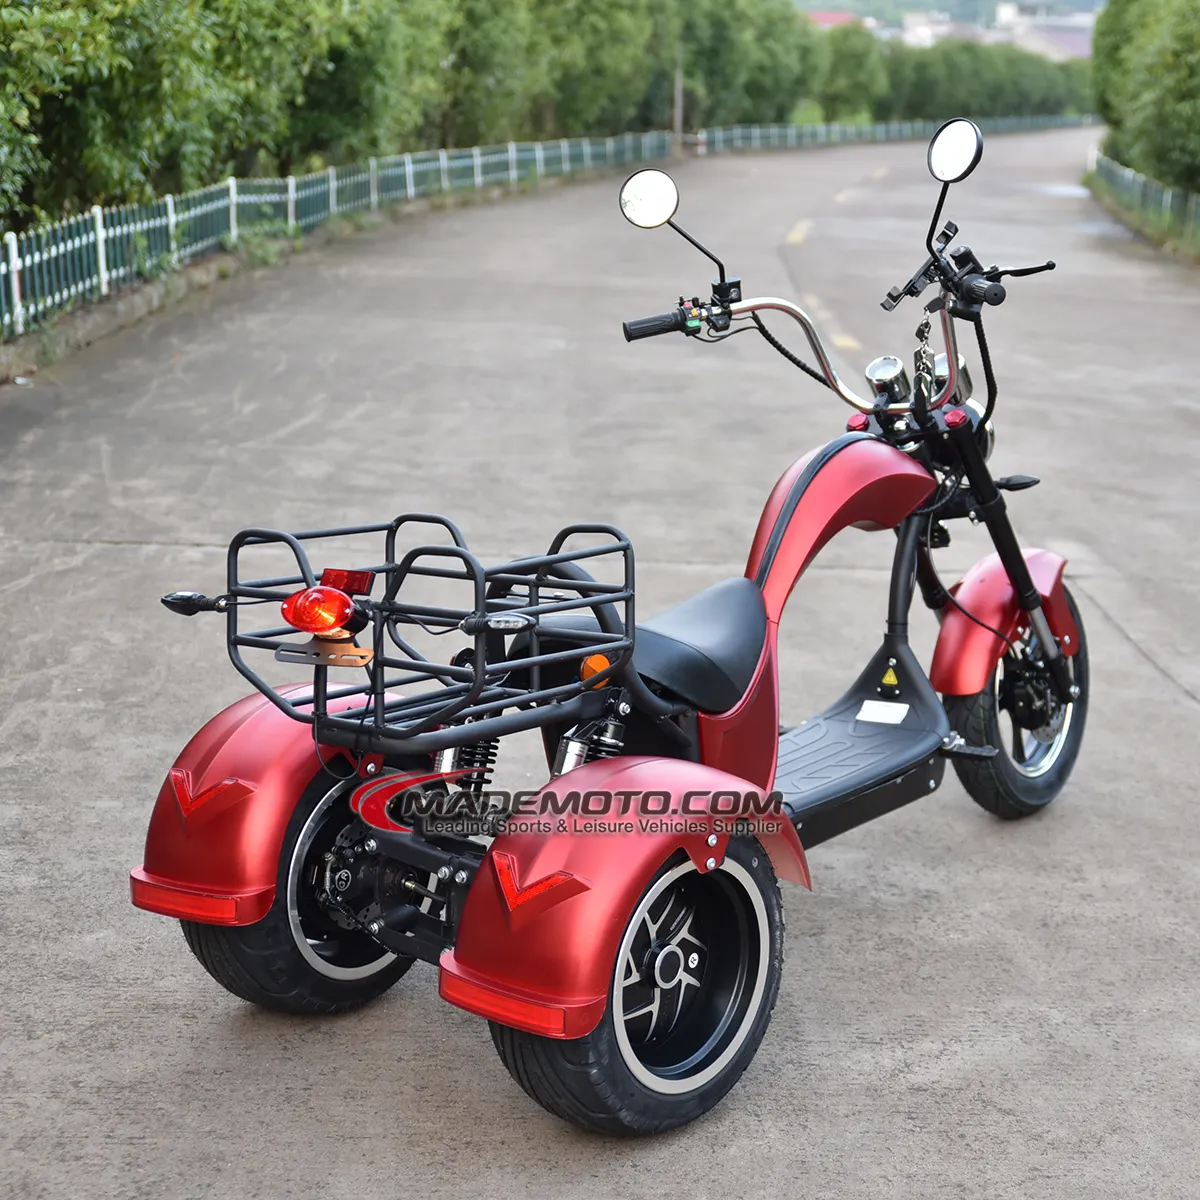 200kg Citycoco Scooter Mobility Motorcycle 60v1500w Brush Less Motor Three-wheeled Scooter Motorcycle 35km/h Speed